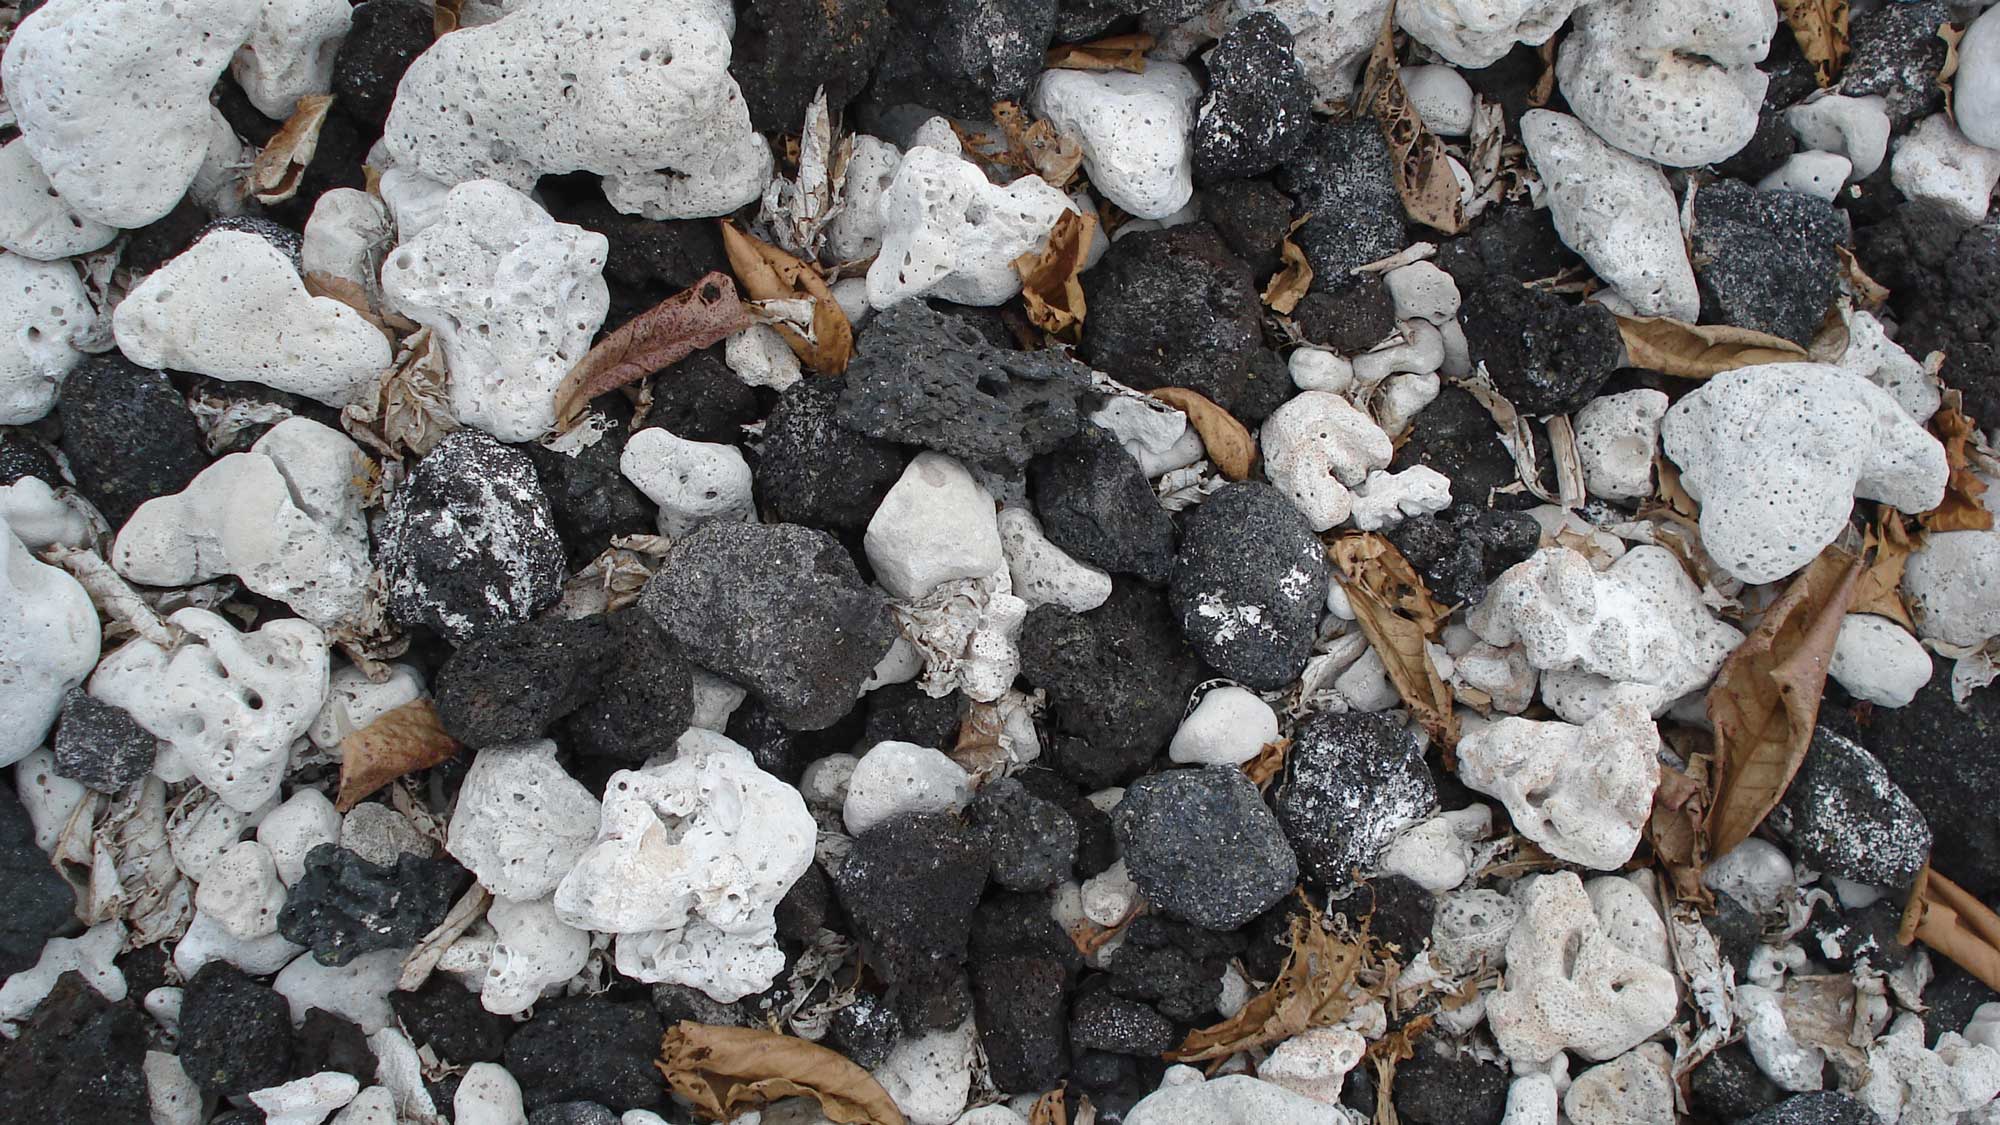 Photograph of rocks in Hawaii, including pieces of black basalt and white limestone made by corals.